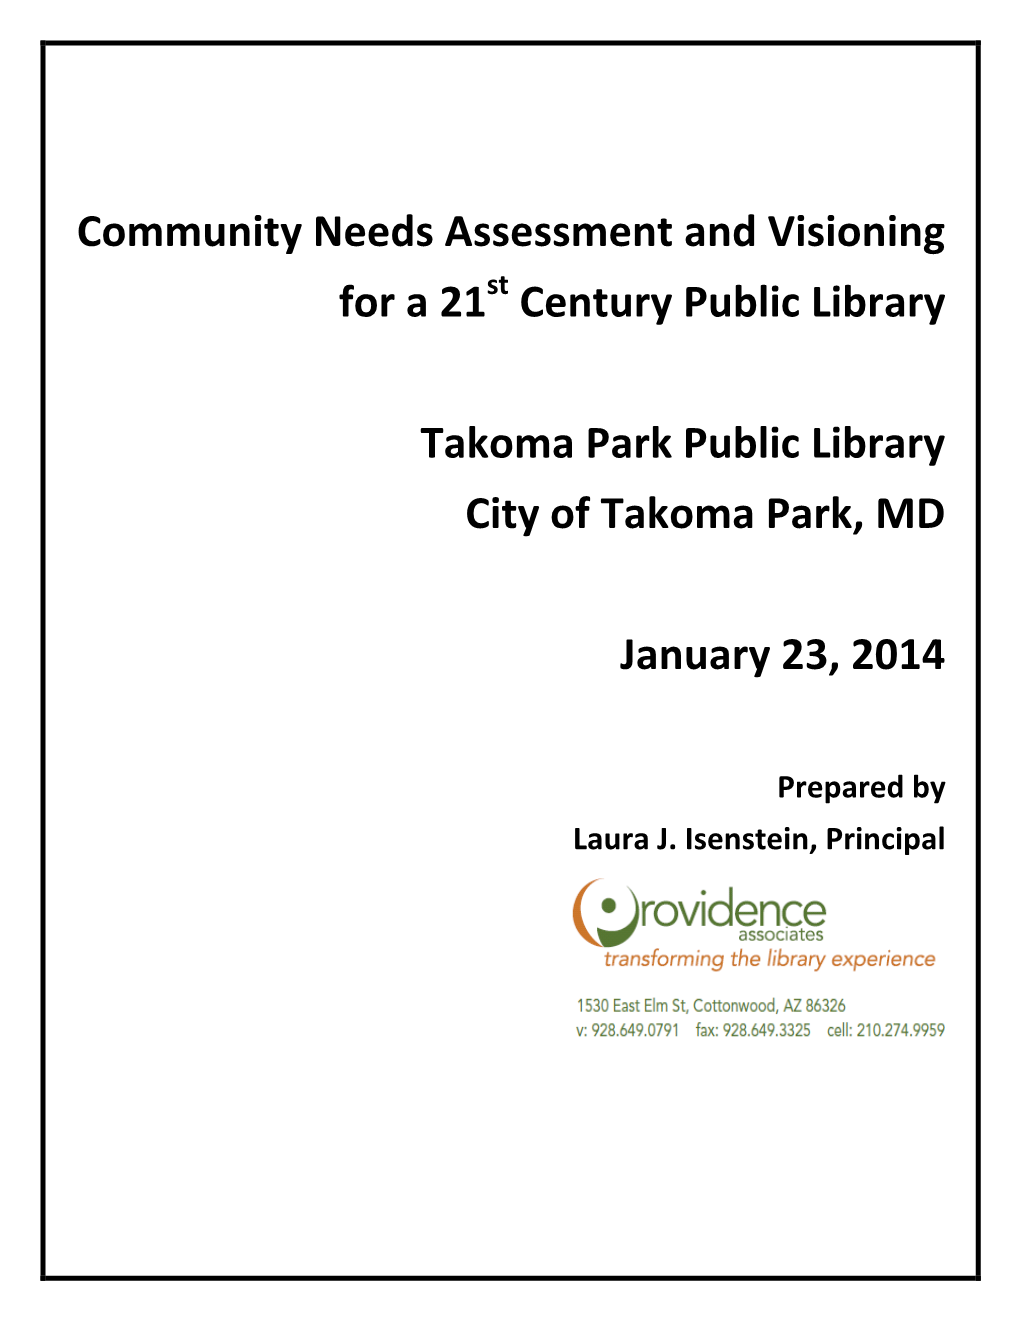 Community Needs Assessment and Visioning for a 21St Century Public Library